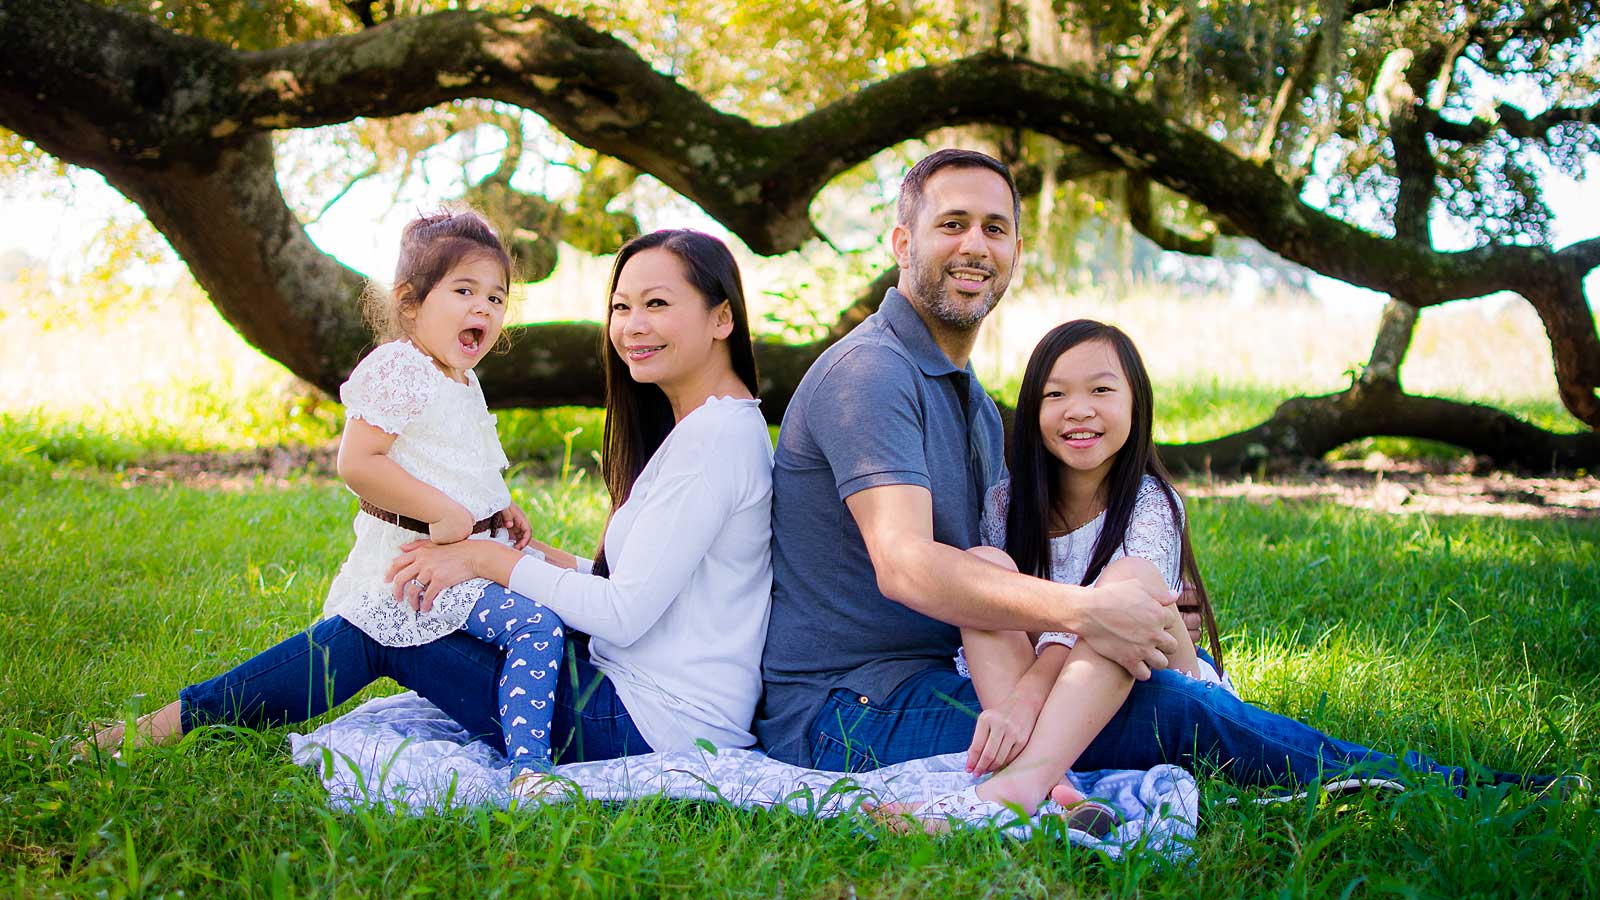 Outdoor family photo session under the oak trees by Needville, Texas family photographer Kristen Richards